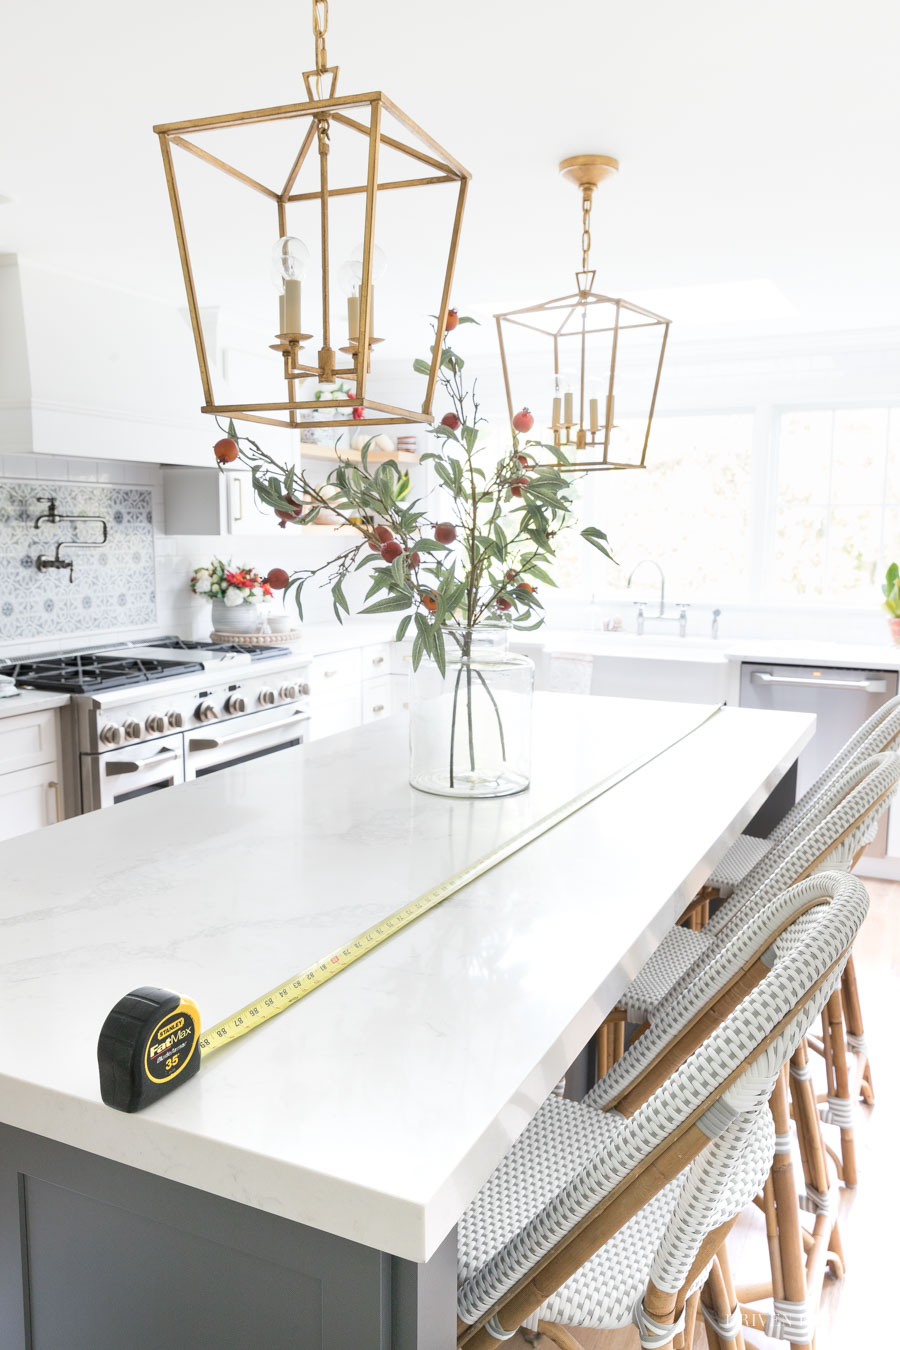 Great post with tips on height and spacing of pendant lights over a kitchen island!